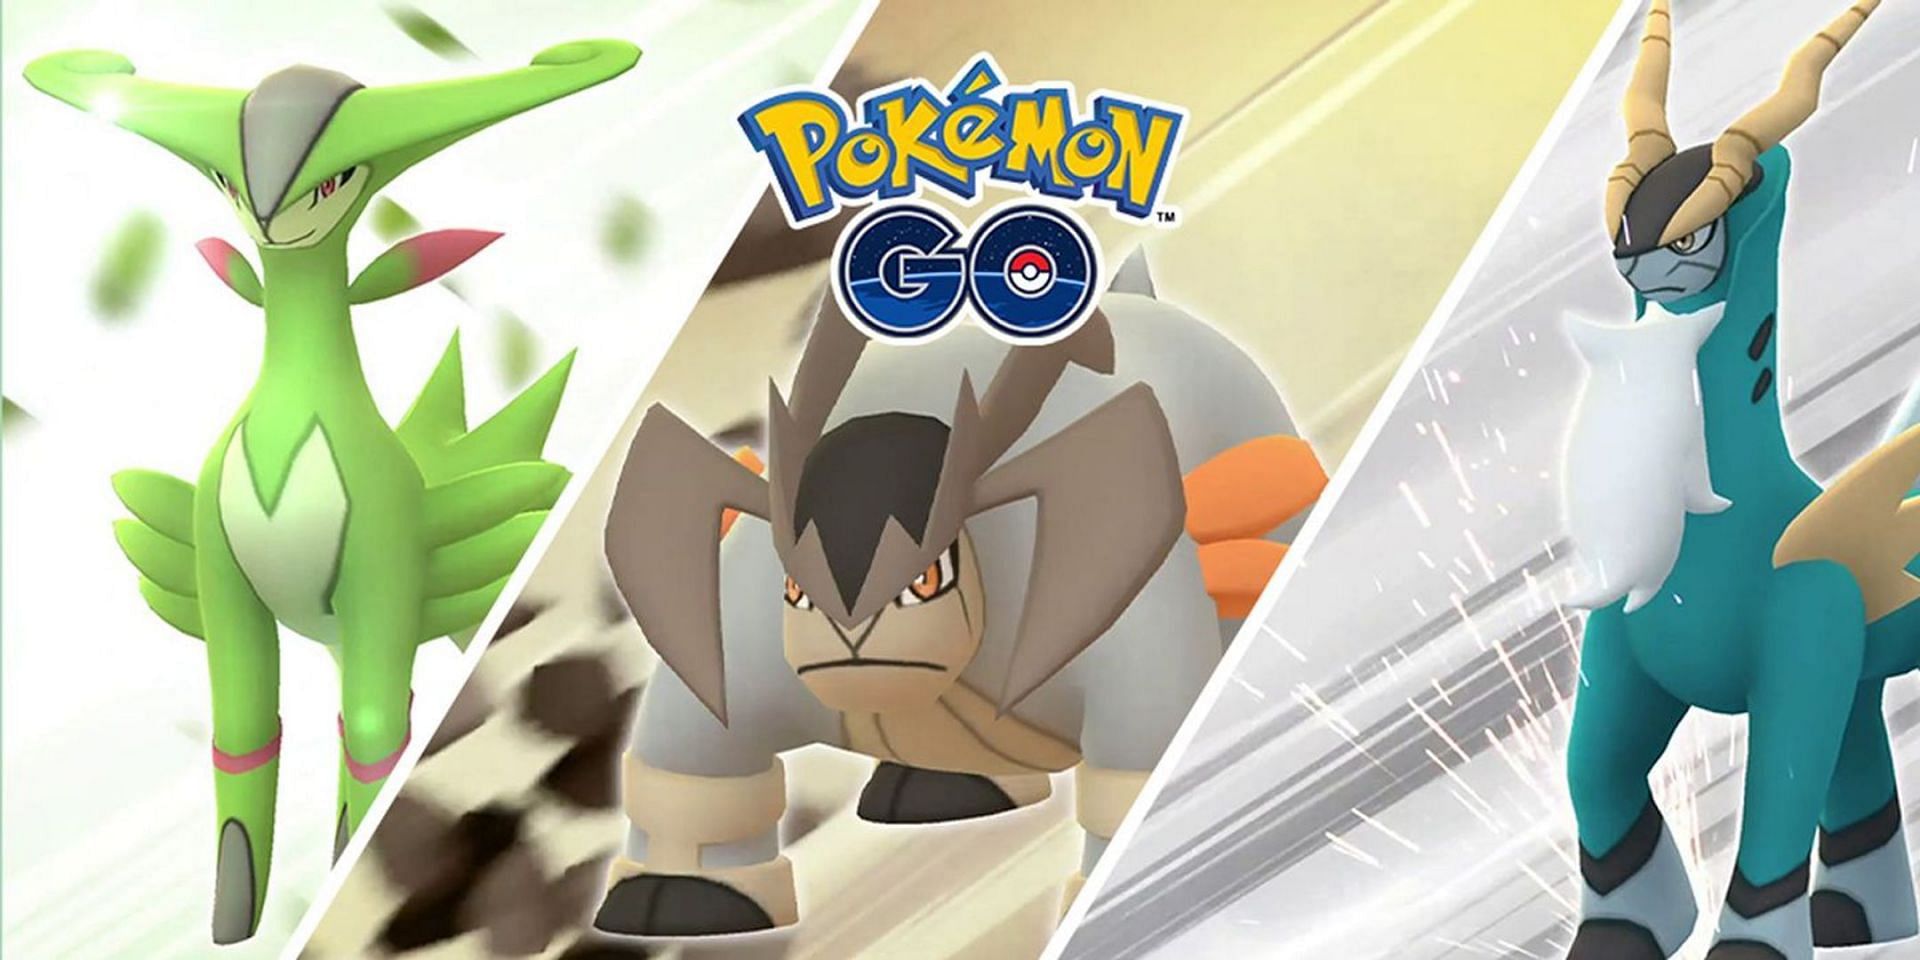 Unova&#039;s Legendary trio as they appear in Pokemon GO&#039;s promotional imagery. (Image via Niantic)